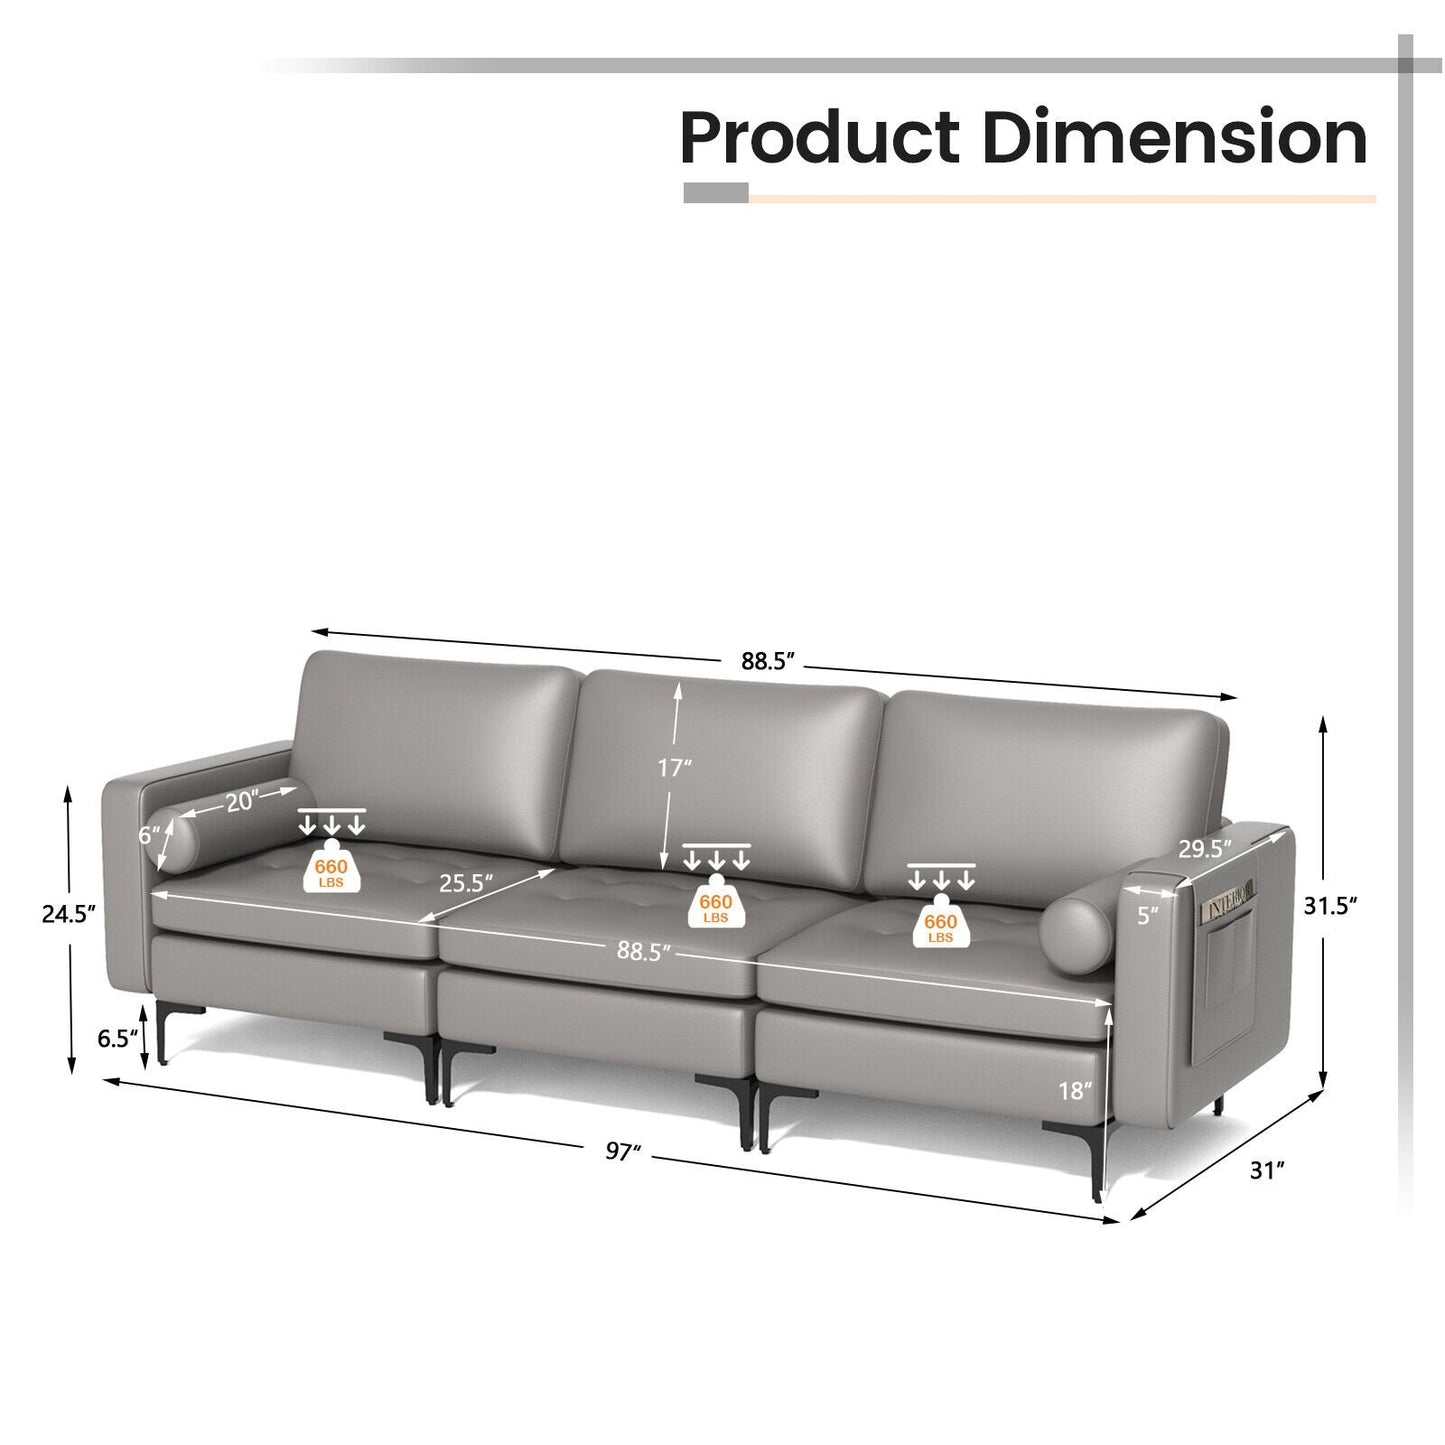 Modular 3-Seat Sofa Couch with Socket USB Ports and Side Storage Pocket, Light Gray